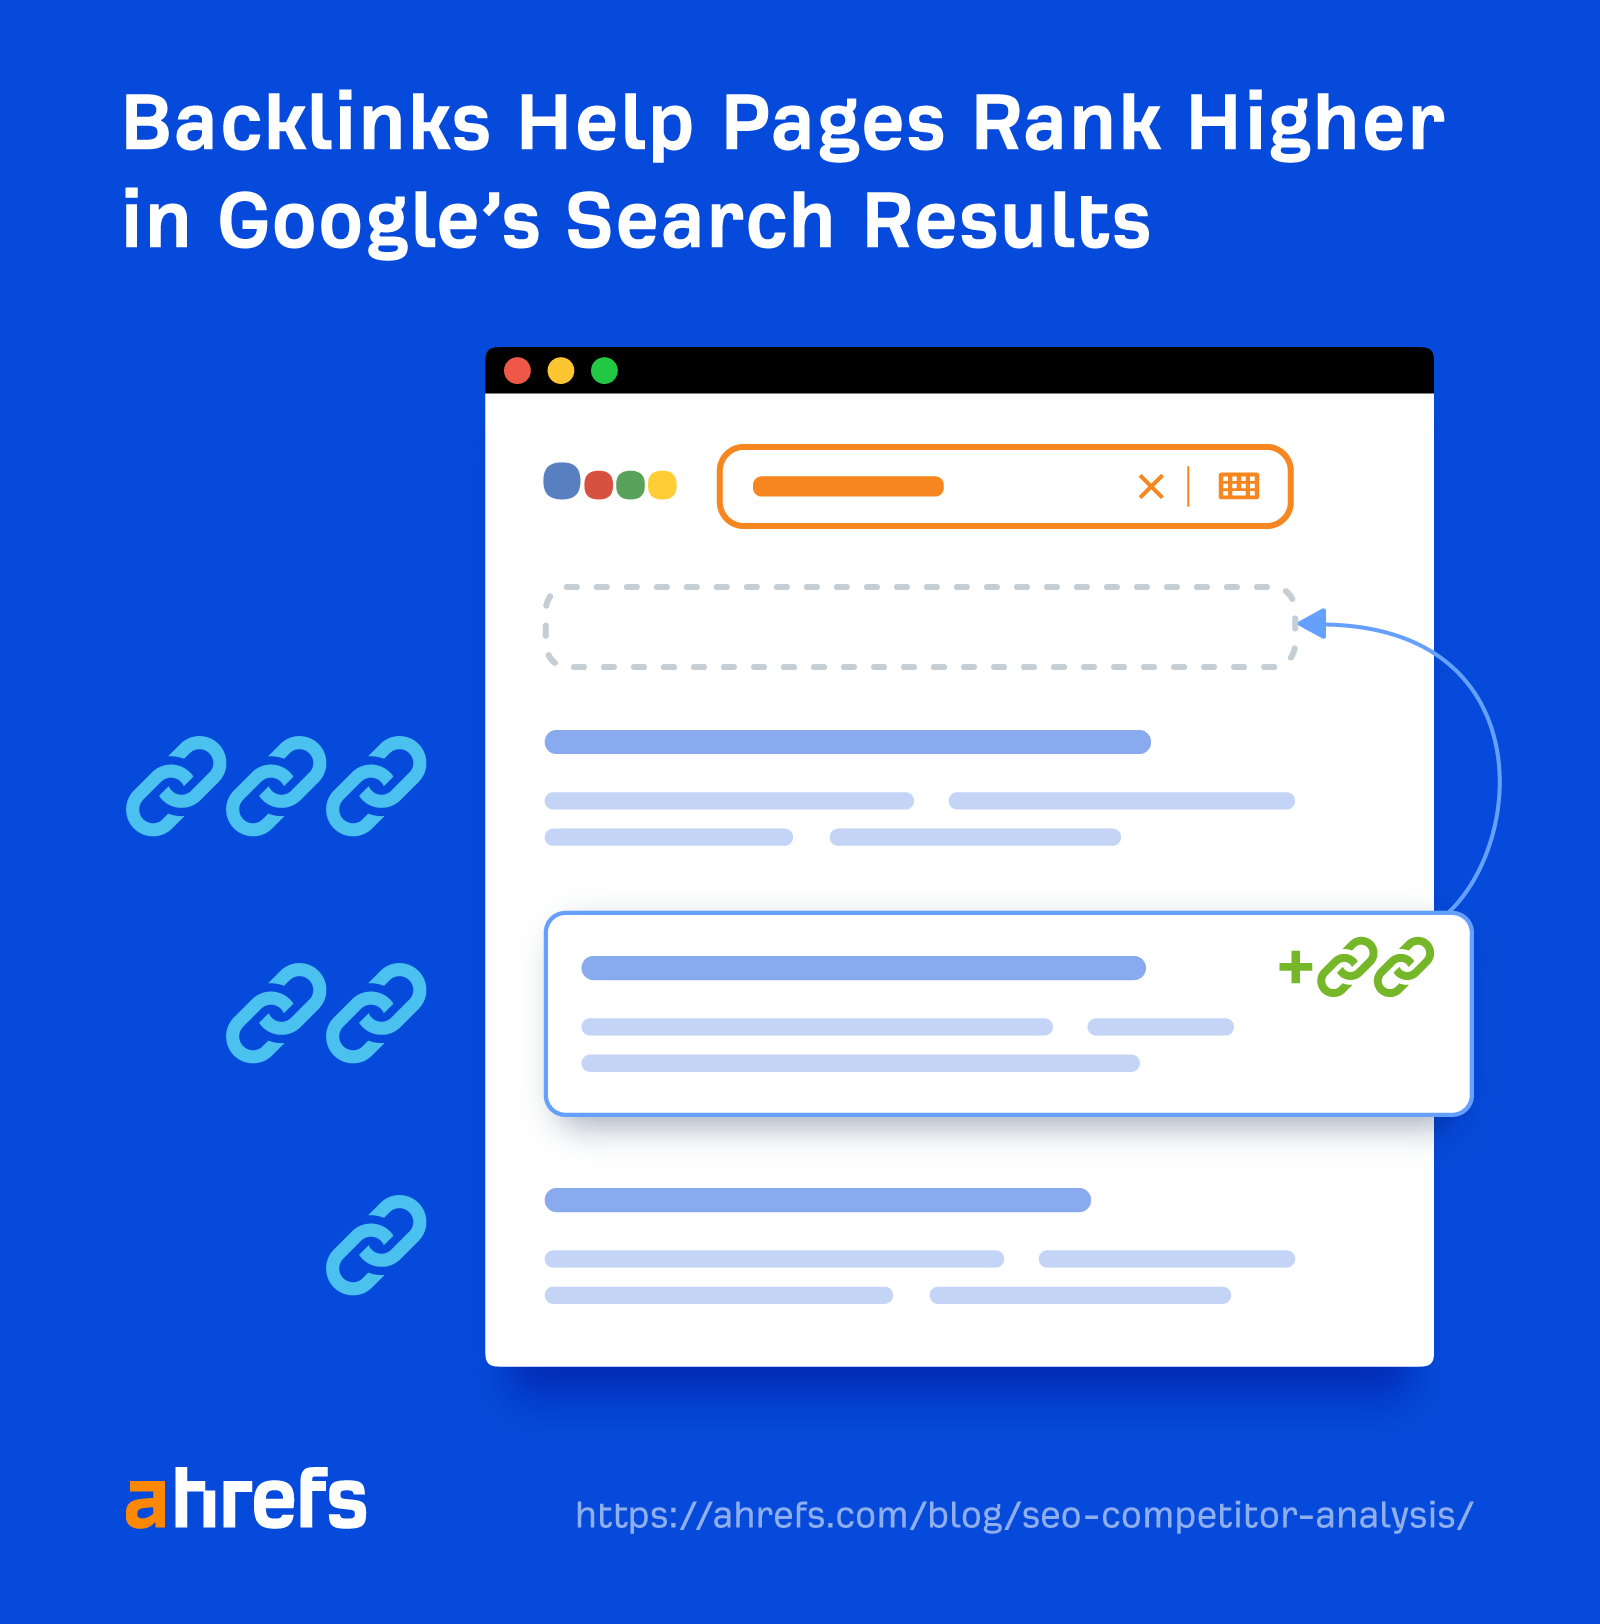 Backlinks help pages rank higher in search results